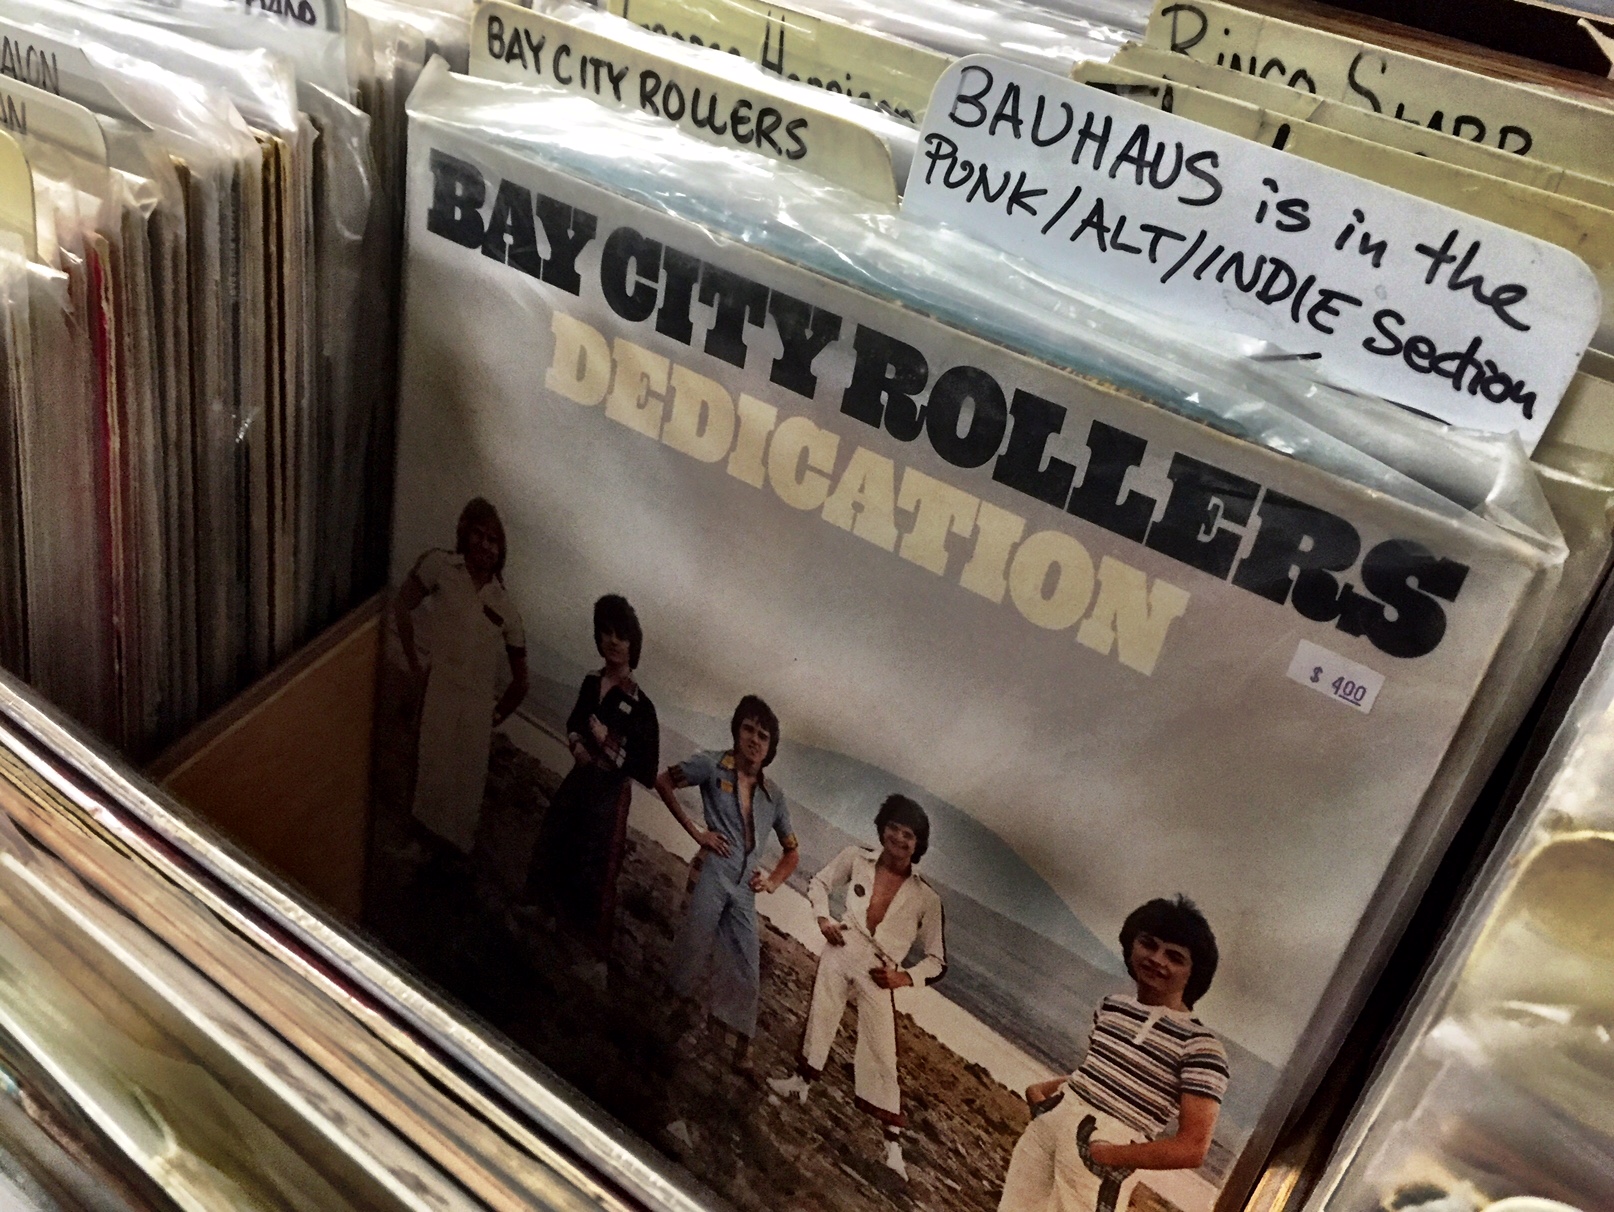 Joe's Record Paradise has been selling used records for 42 years. (WTOP/Neal Augenstein)